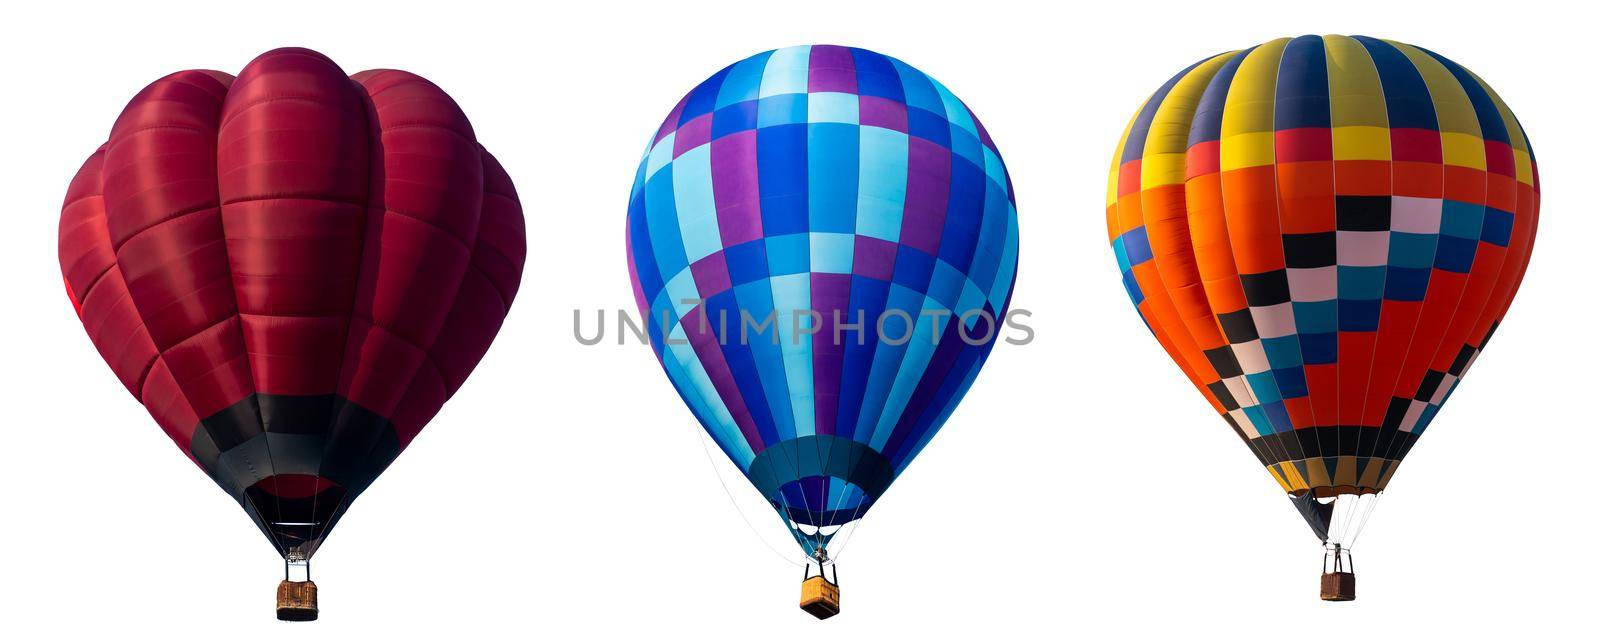 Isolated photo of hot air balloon isolated on white background.